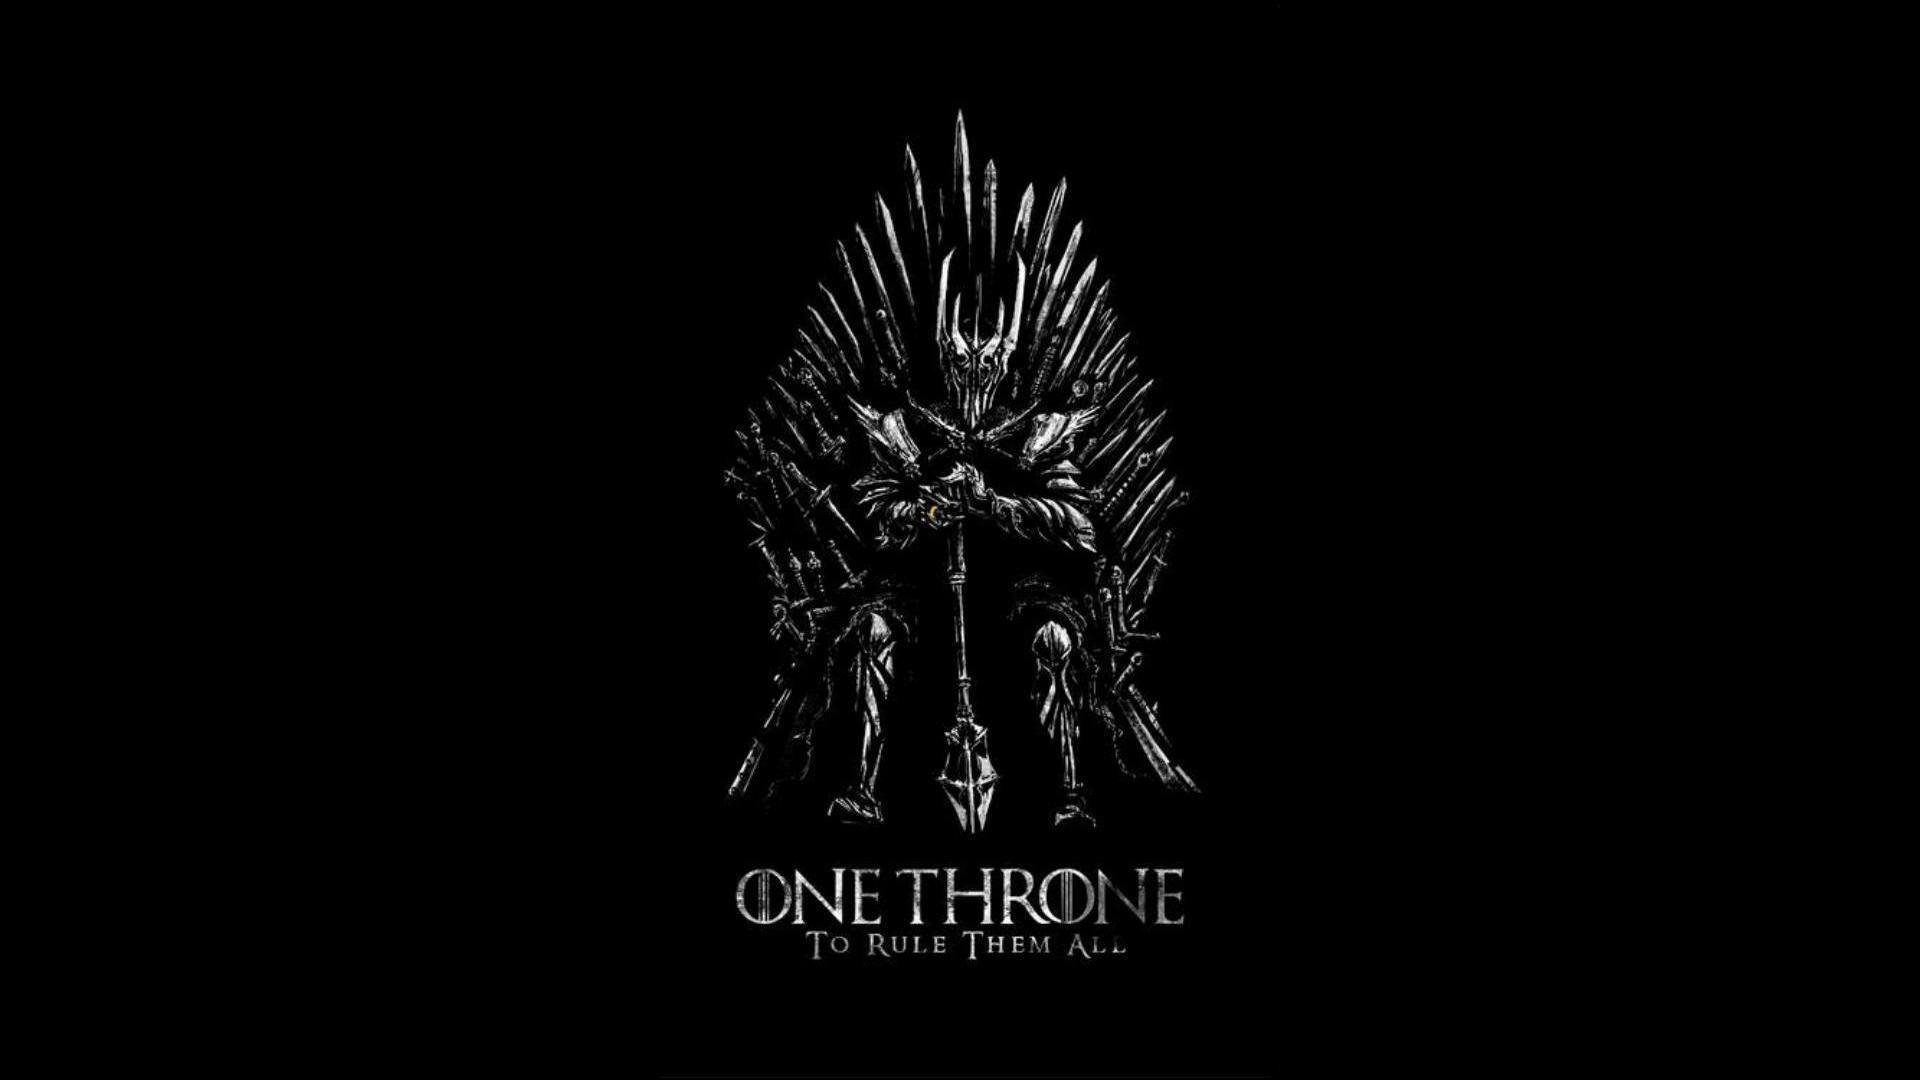 Iron Throne Game Of Thrones A Song Of Ice And Fire The Lord Of The Rings Sauron Crossover Simple Bac 1920x1080